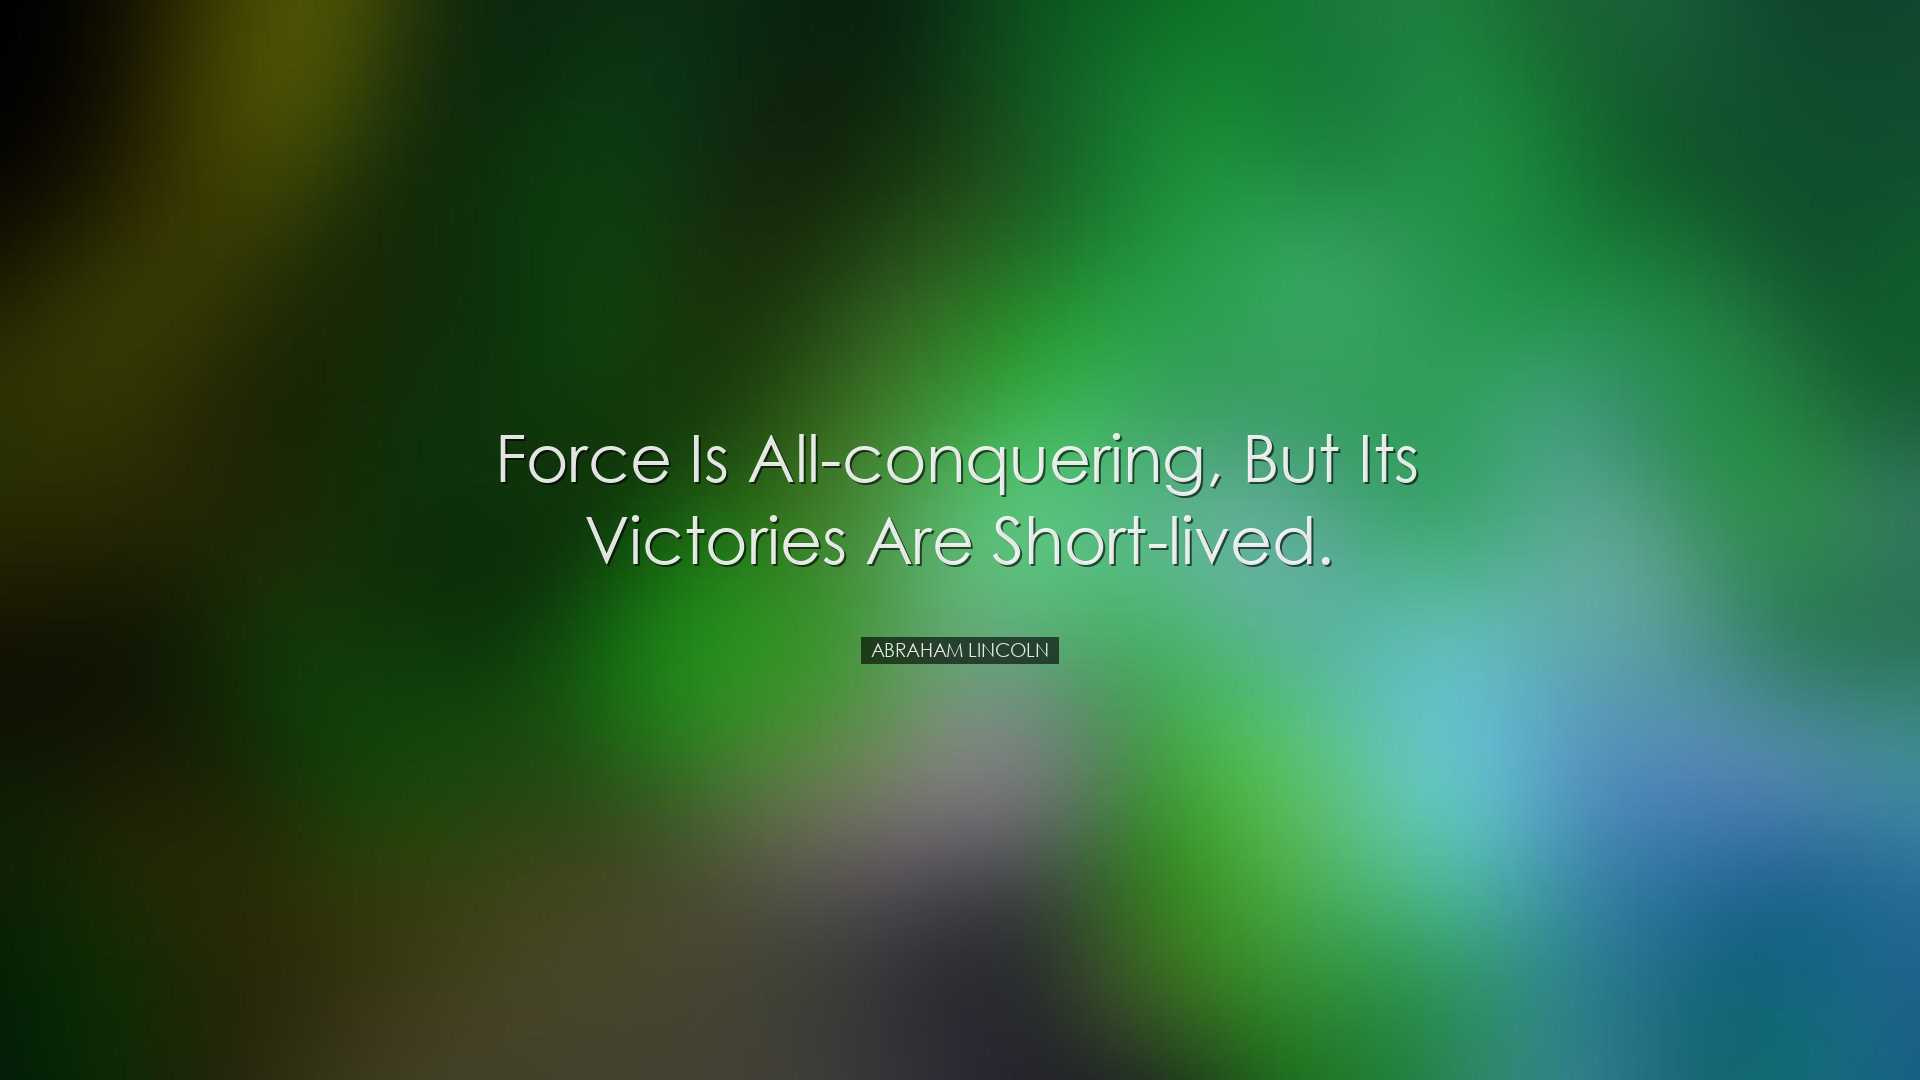 Force is all-conquering, but its victories are short-lived. - Abra